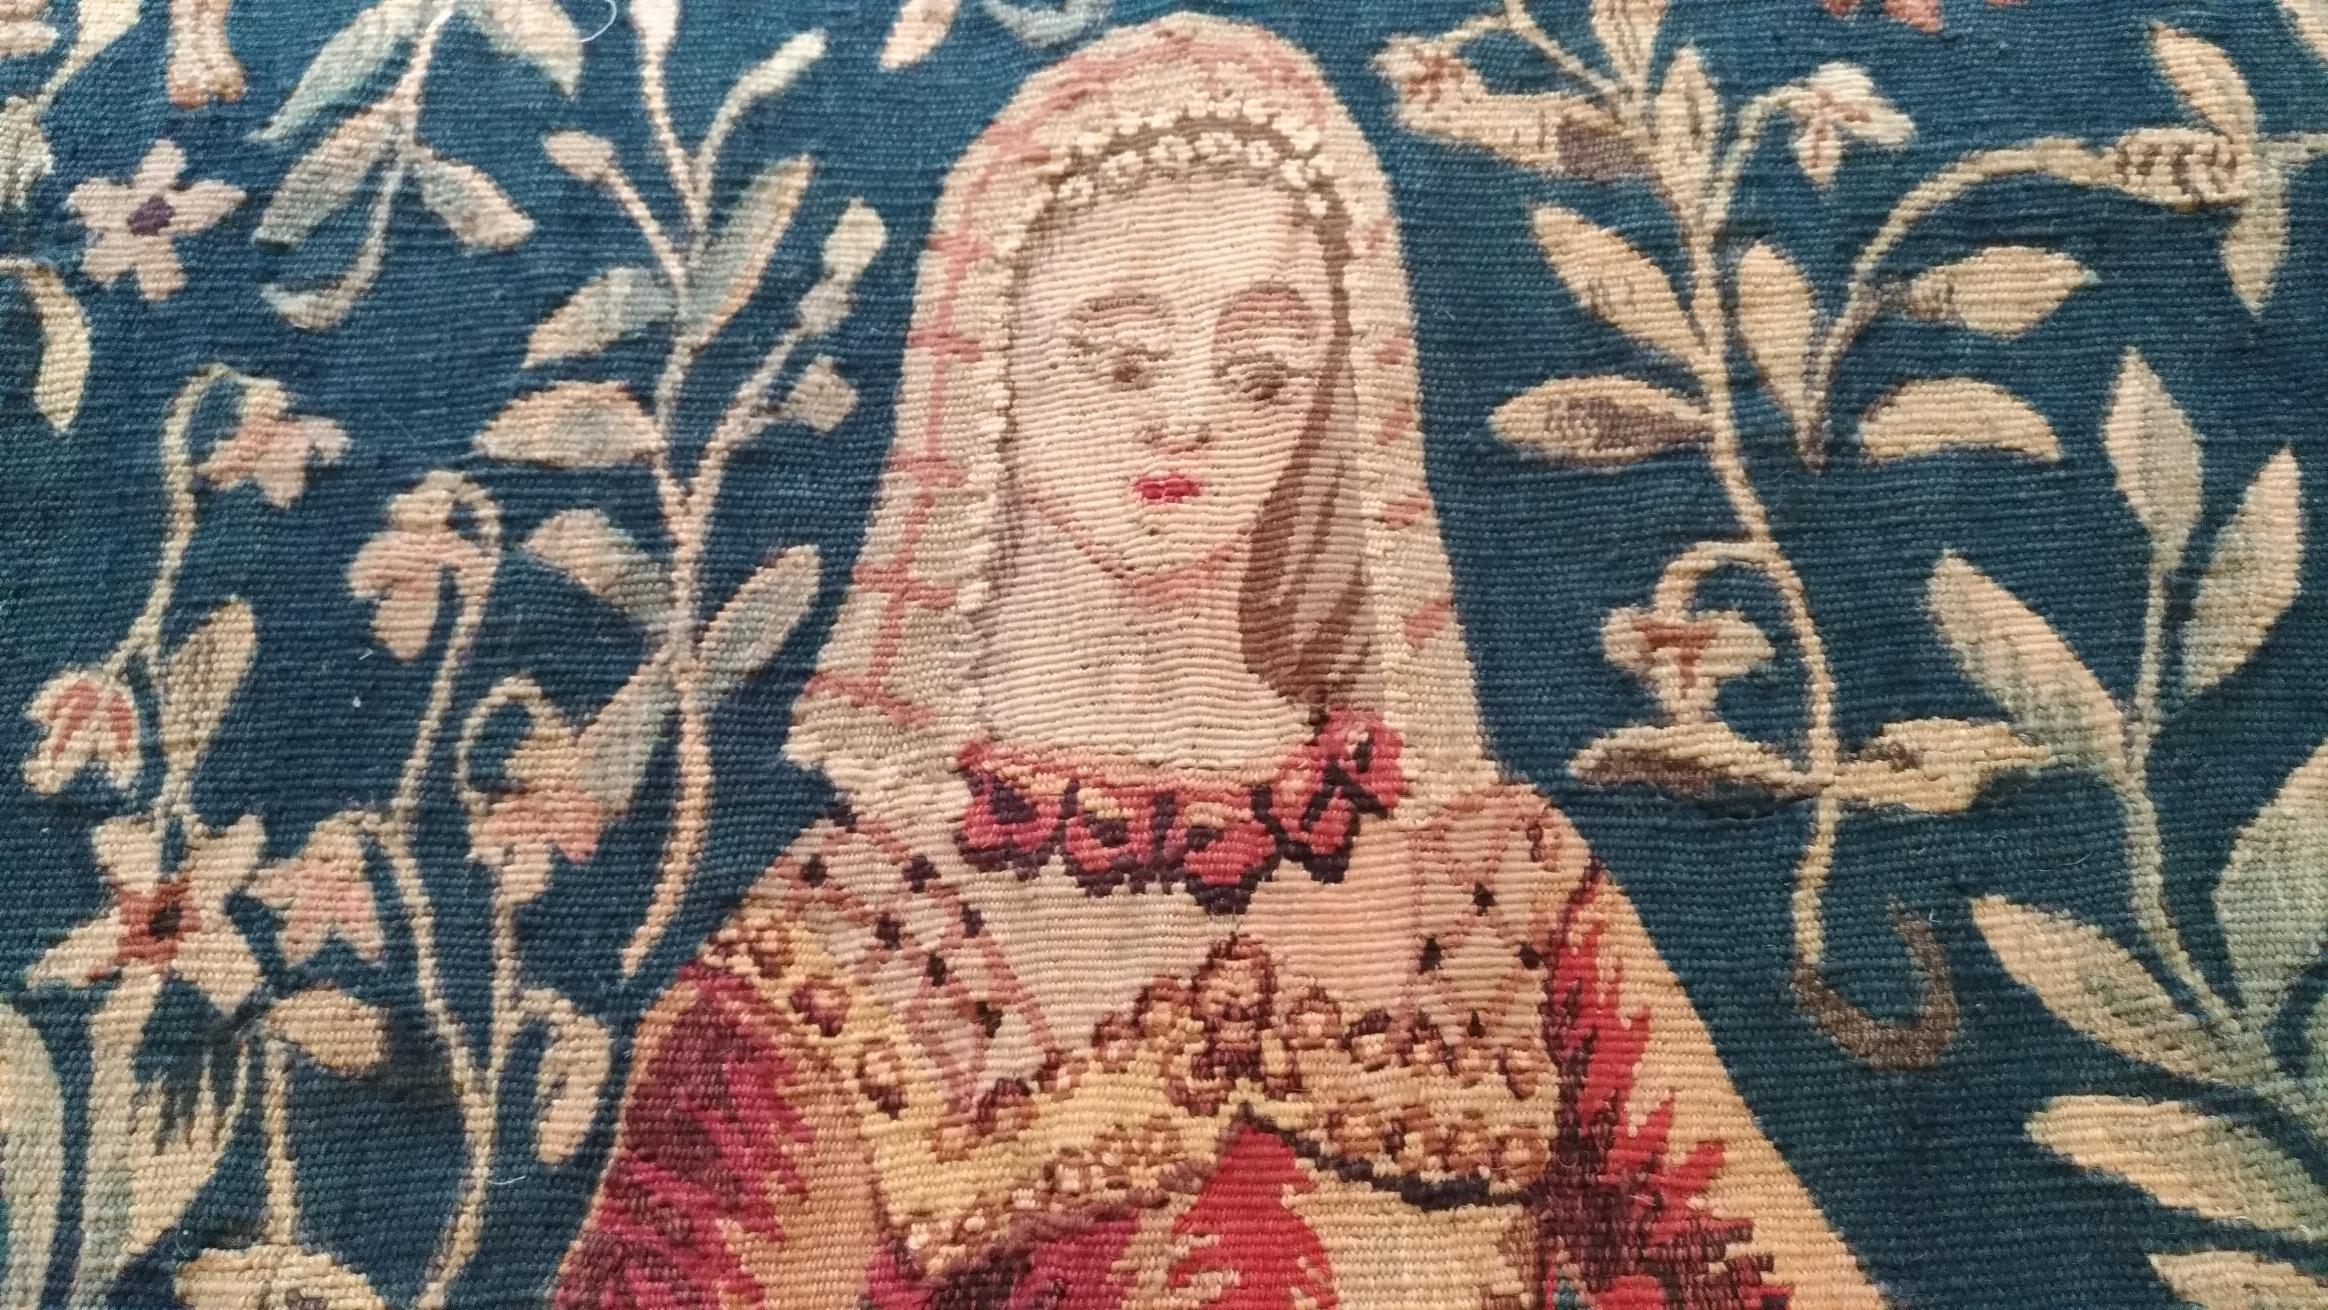 1107 - a very beautiful and historic 19th century tapestry woven at the Royal Aubusson factory.